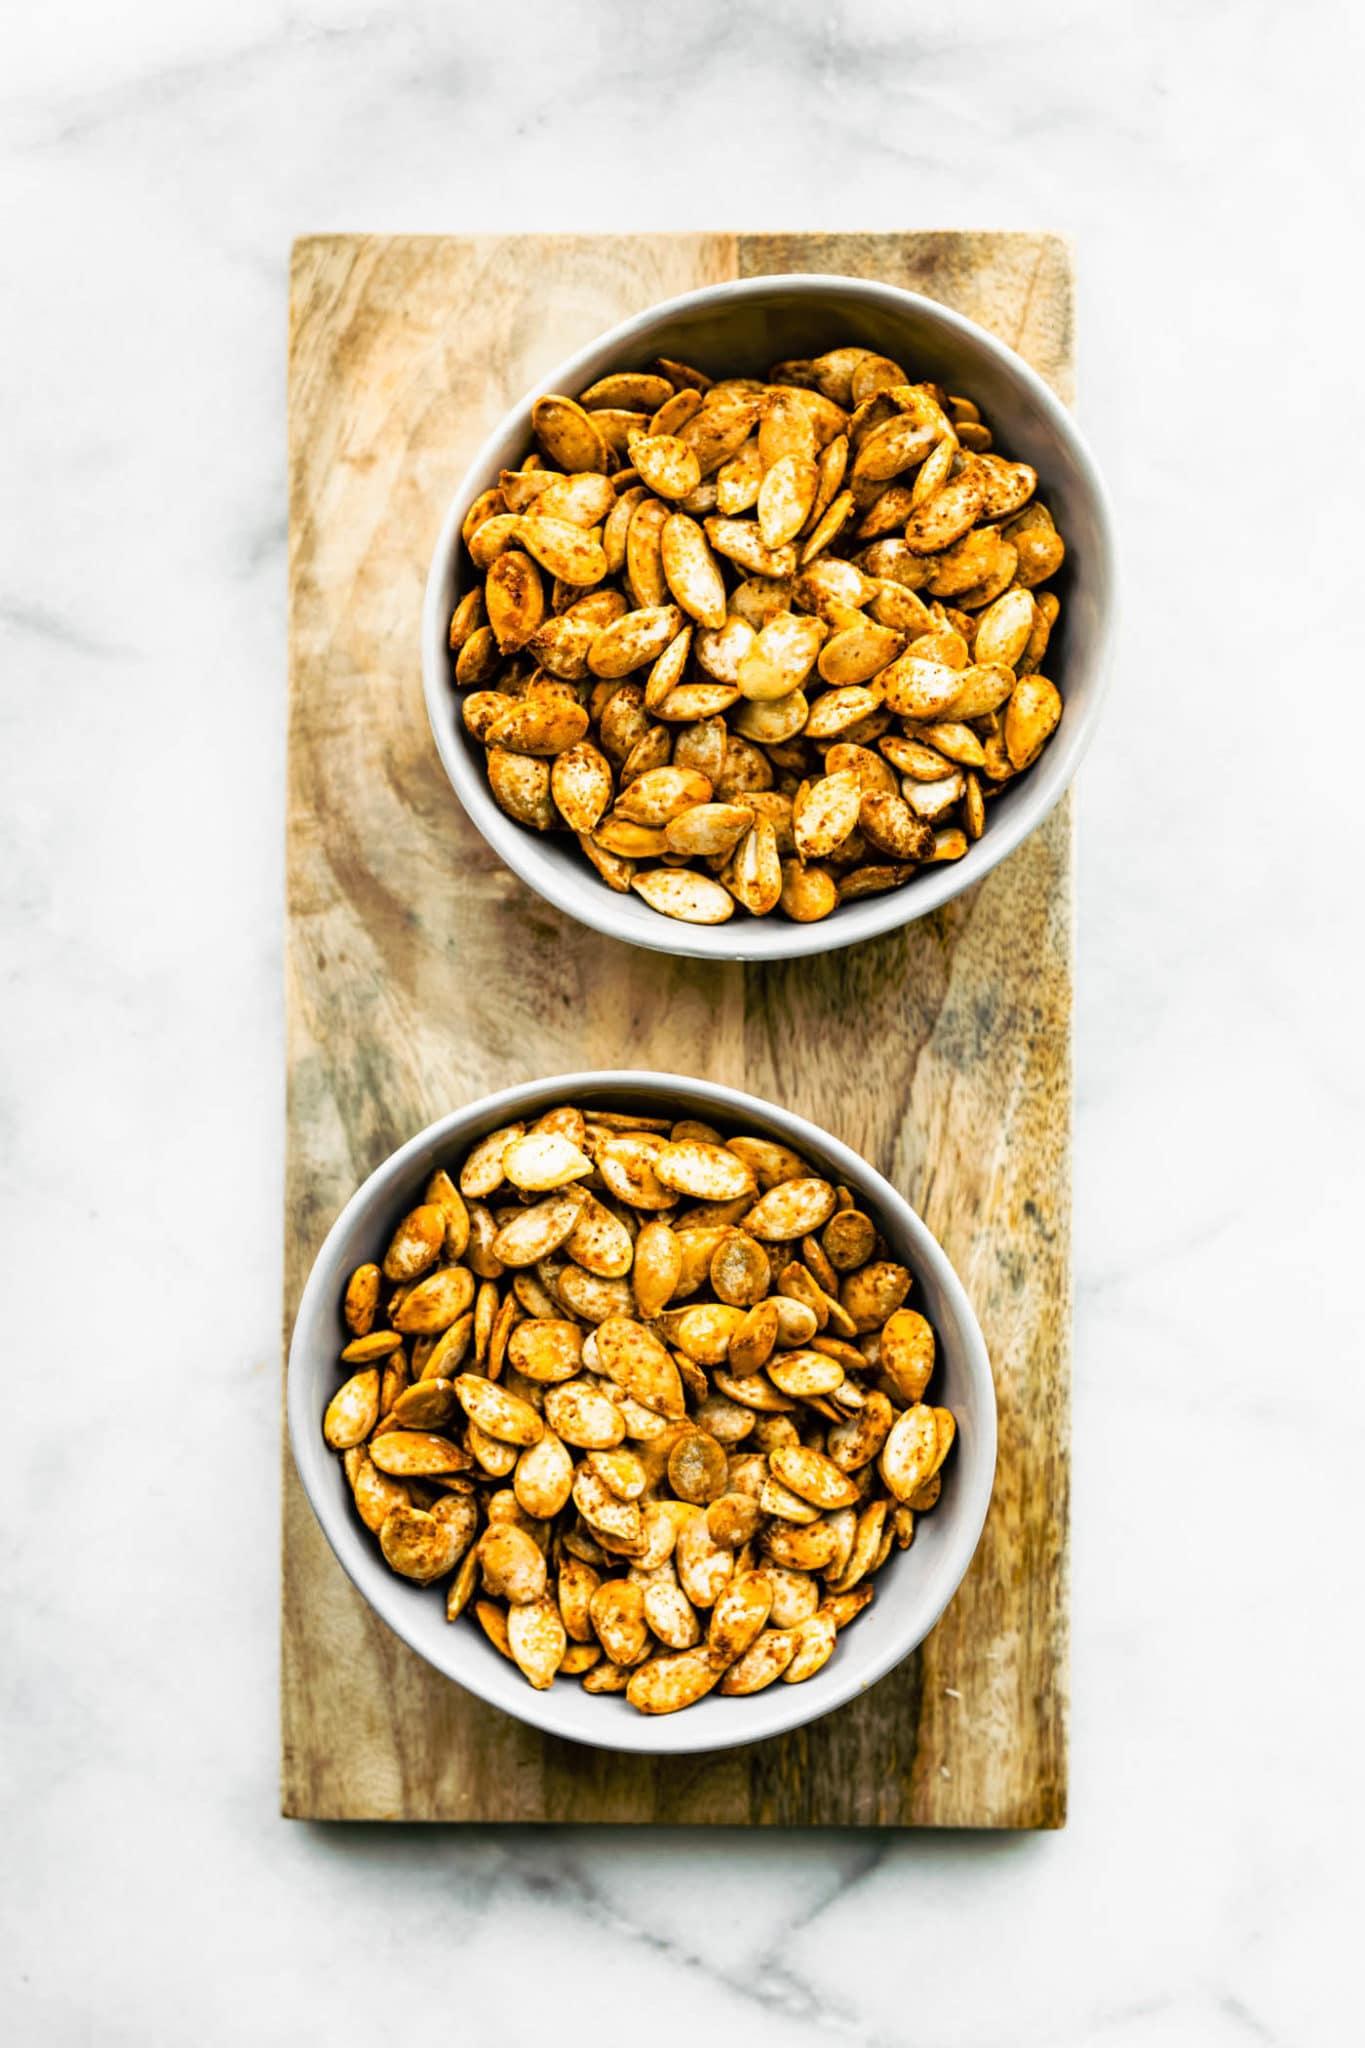 Two bowls of flavored roasted pumpkin seeds on a wooden cutting board.